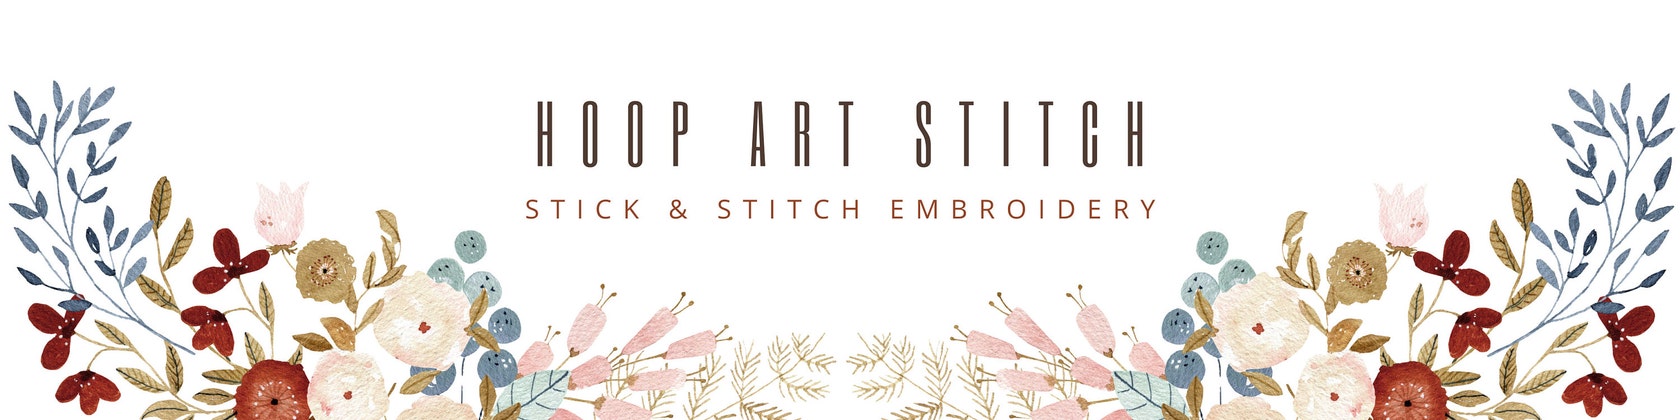 Botanical Stick and Stitch Embroidery Pouch Kit, Floral Embroidery